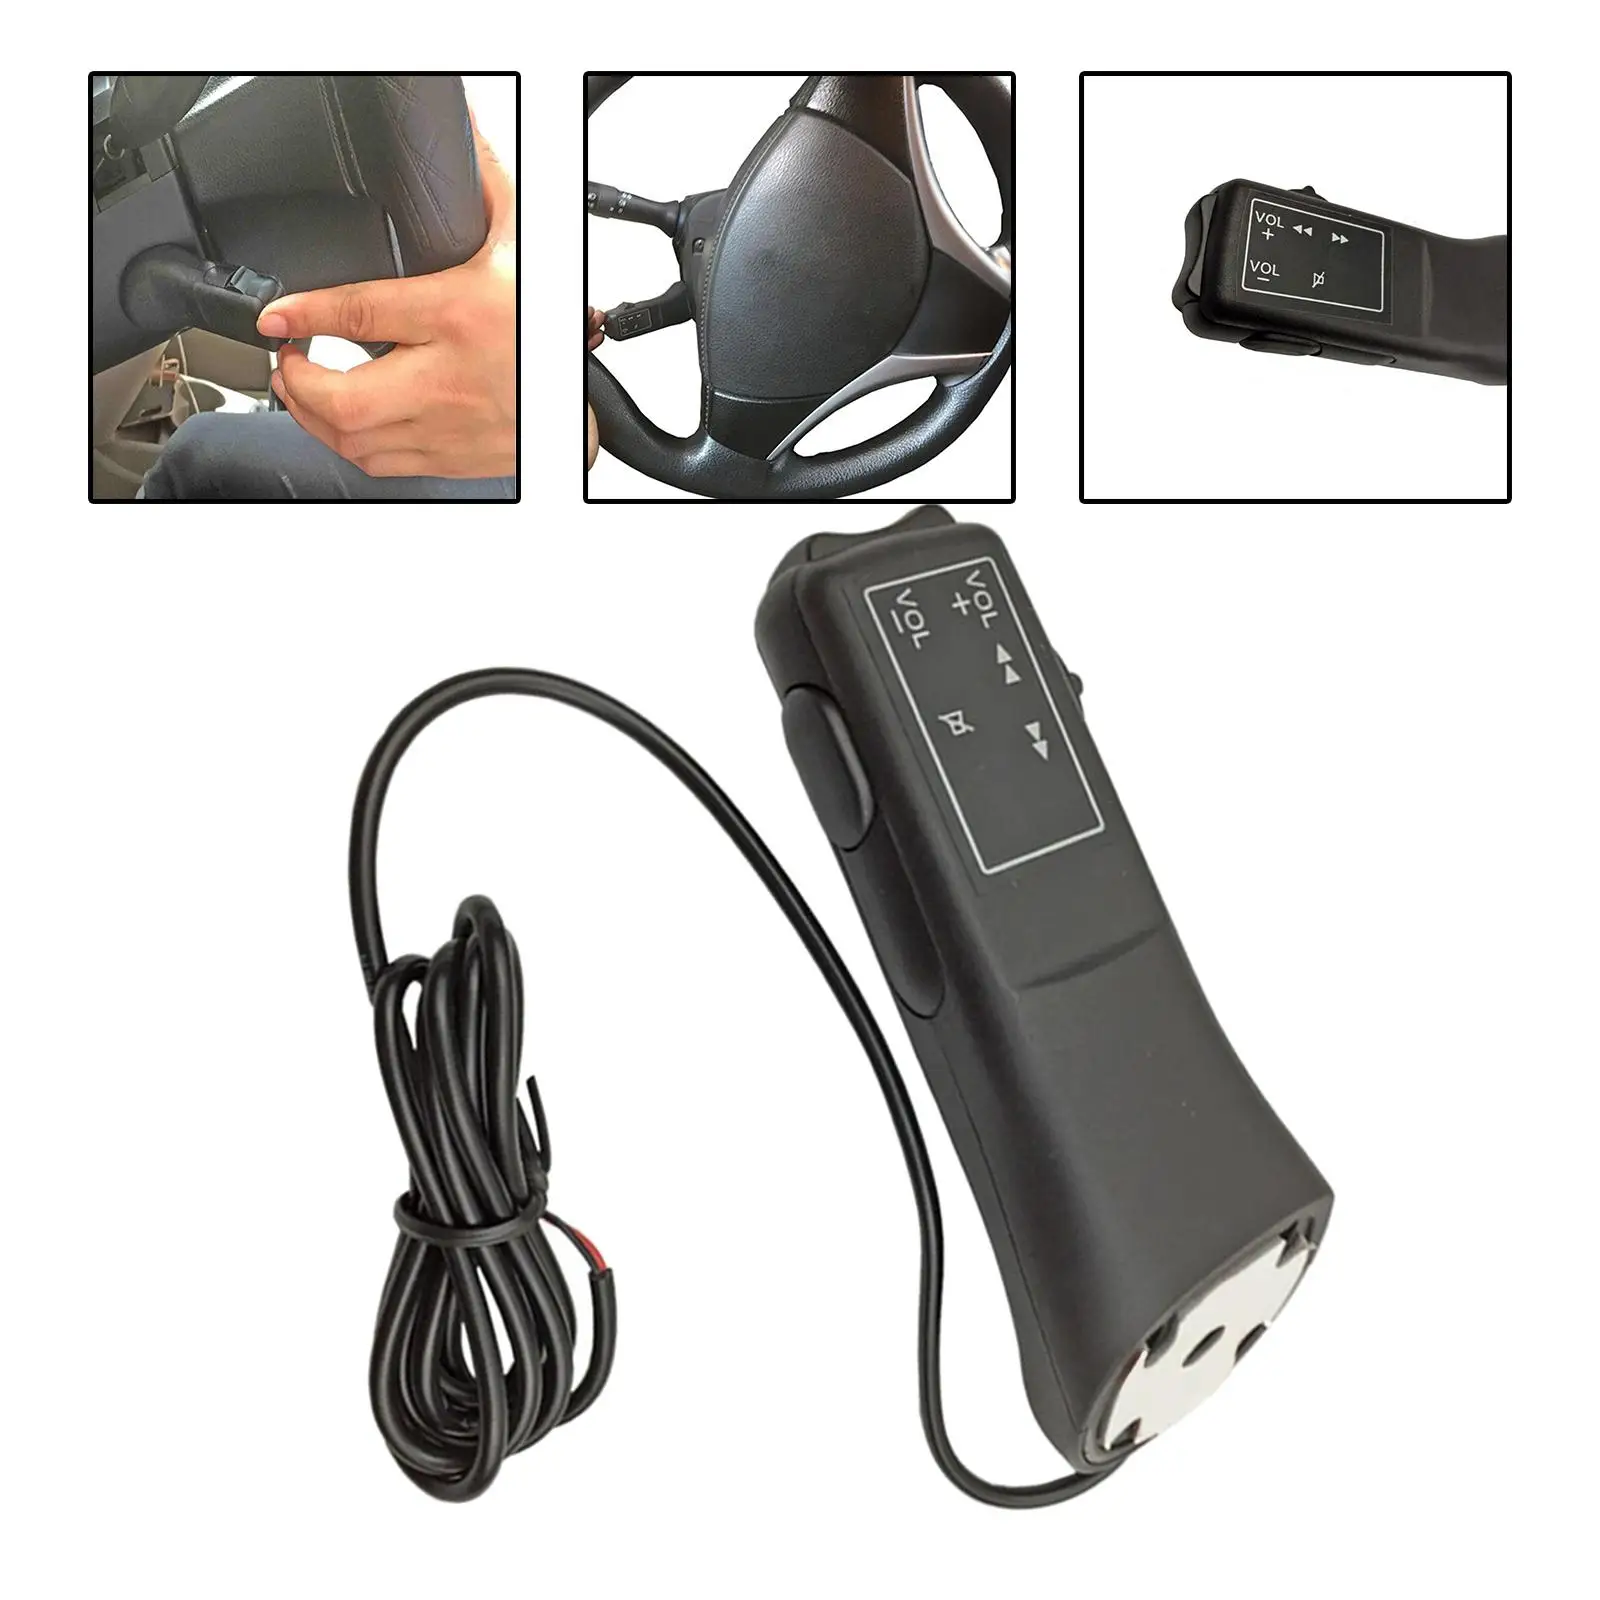 Car Radio Wired Controller Practical Fit for Car Radio Direct Replaces Car